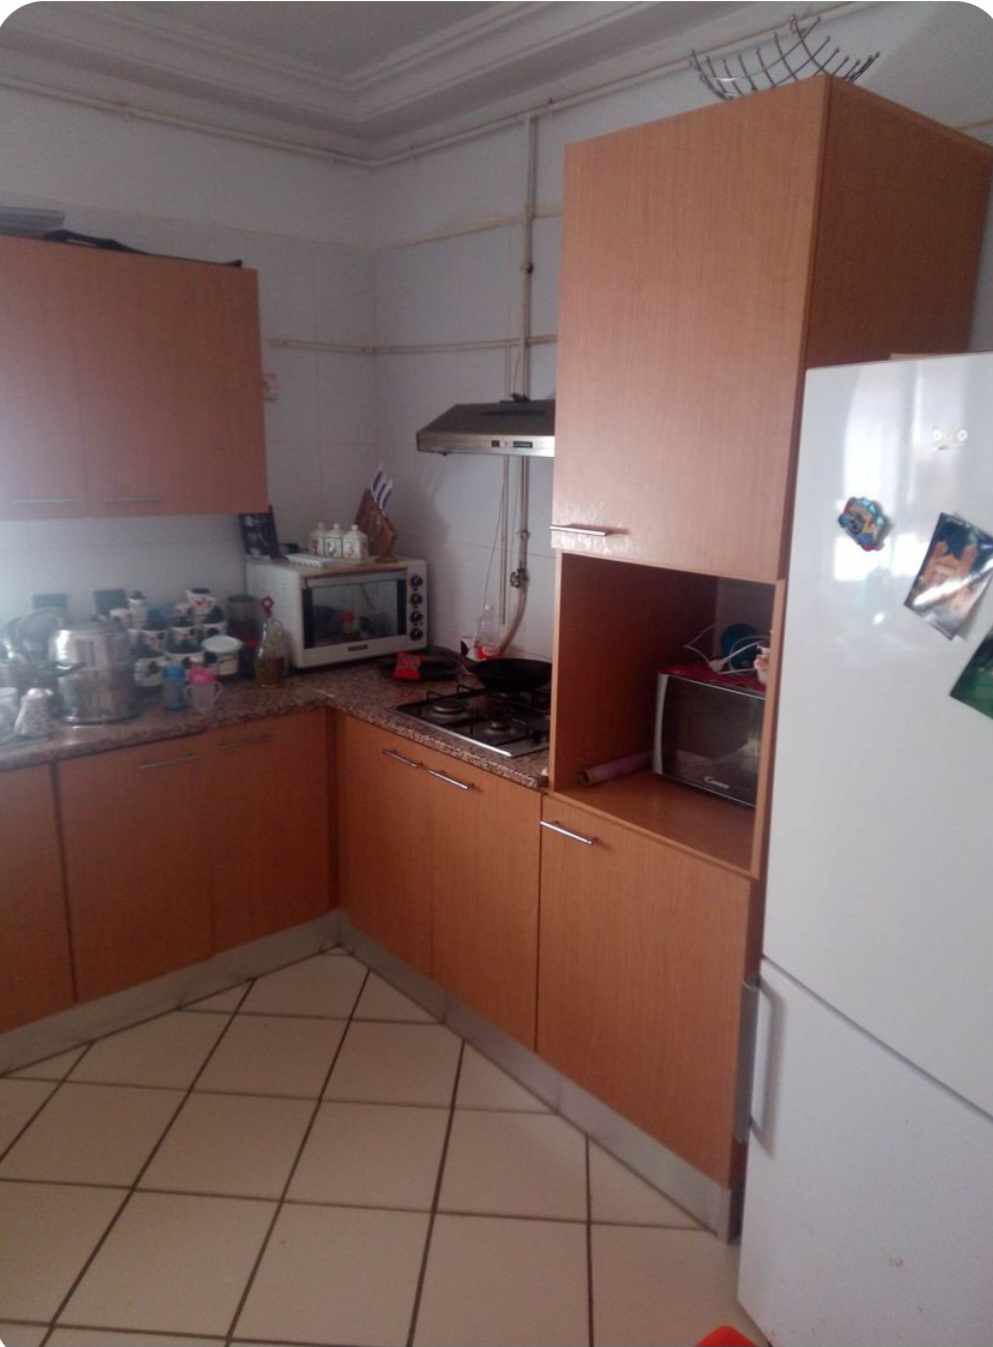 Mannouba Denden Vente Appart. 4 pices Appartement aagba